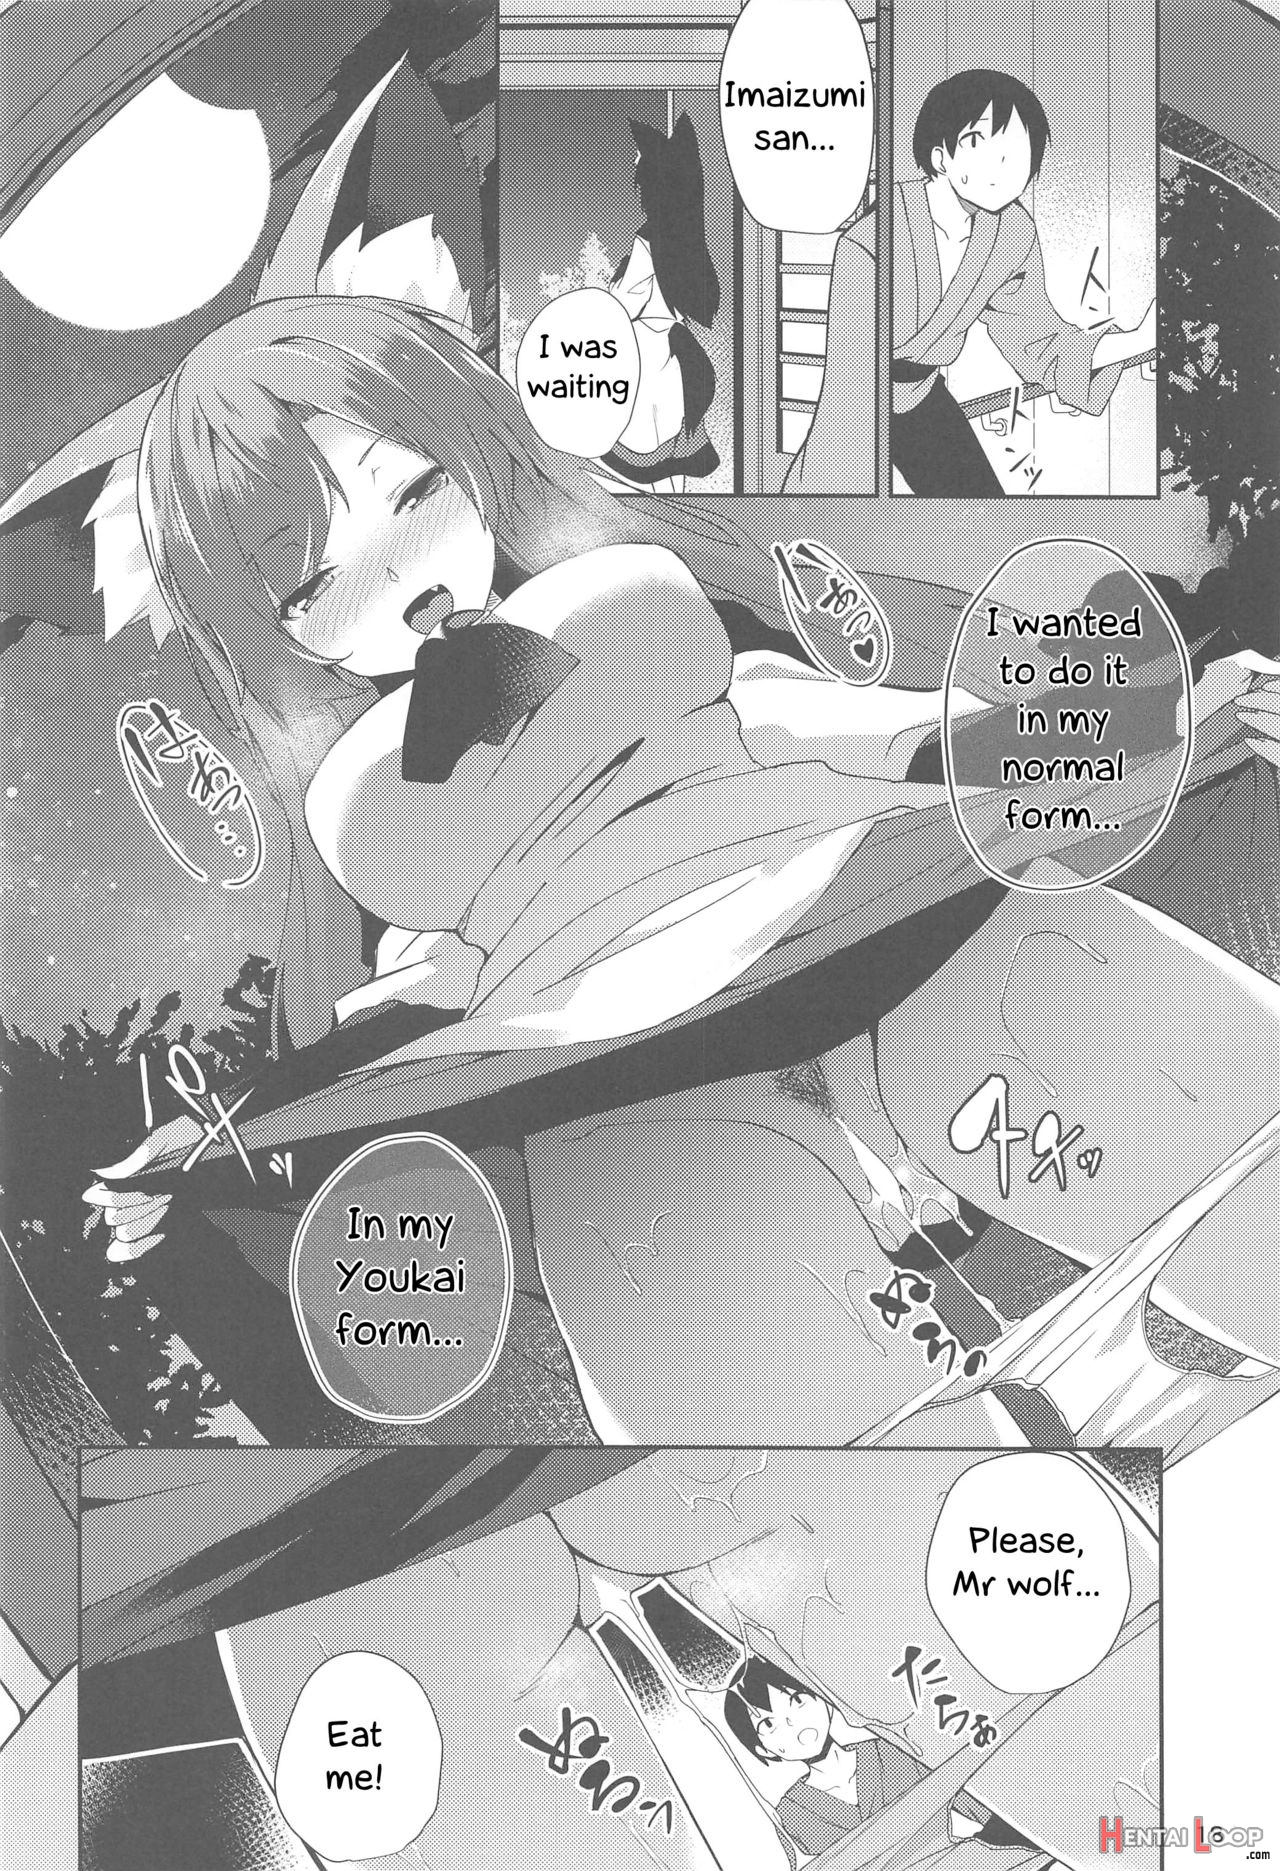 Kagerou's Human Exposure Record page 17